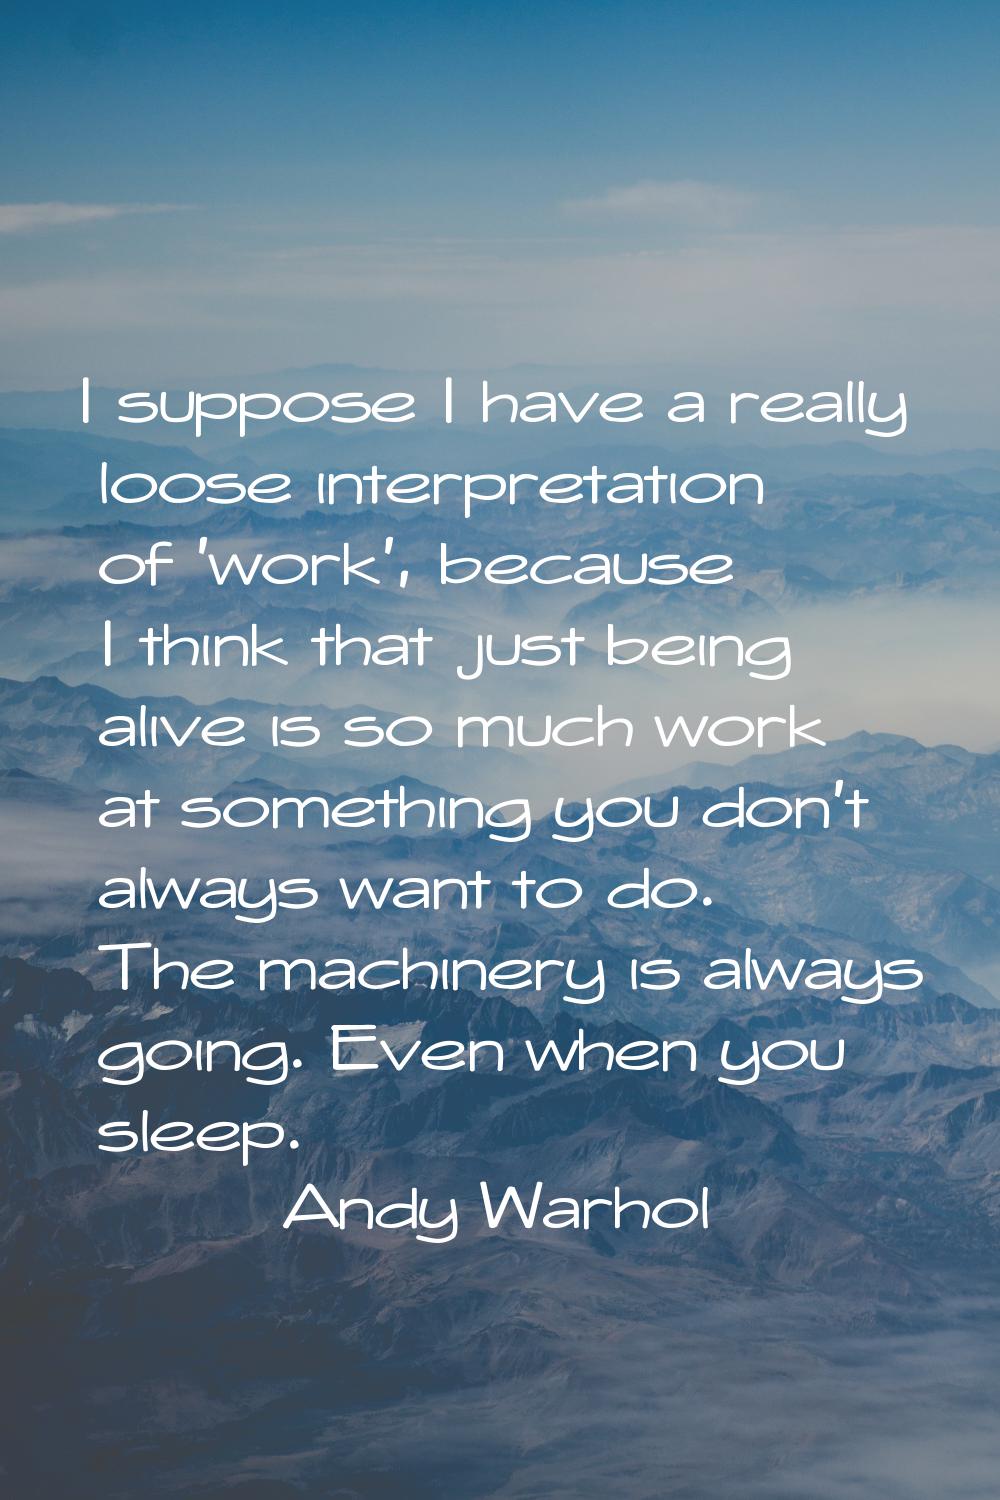 I suppose I have a really loose interpretation of 'work', because I think that just being alive is 